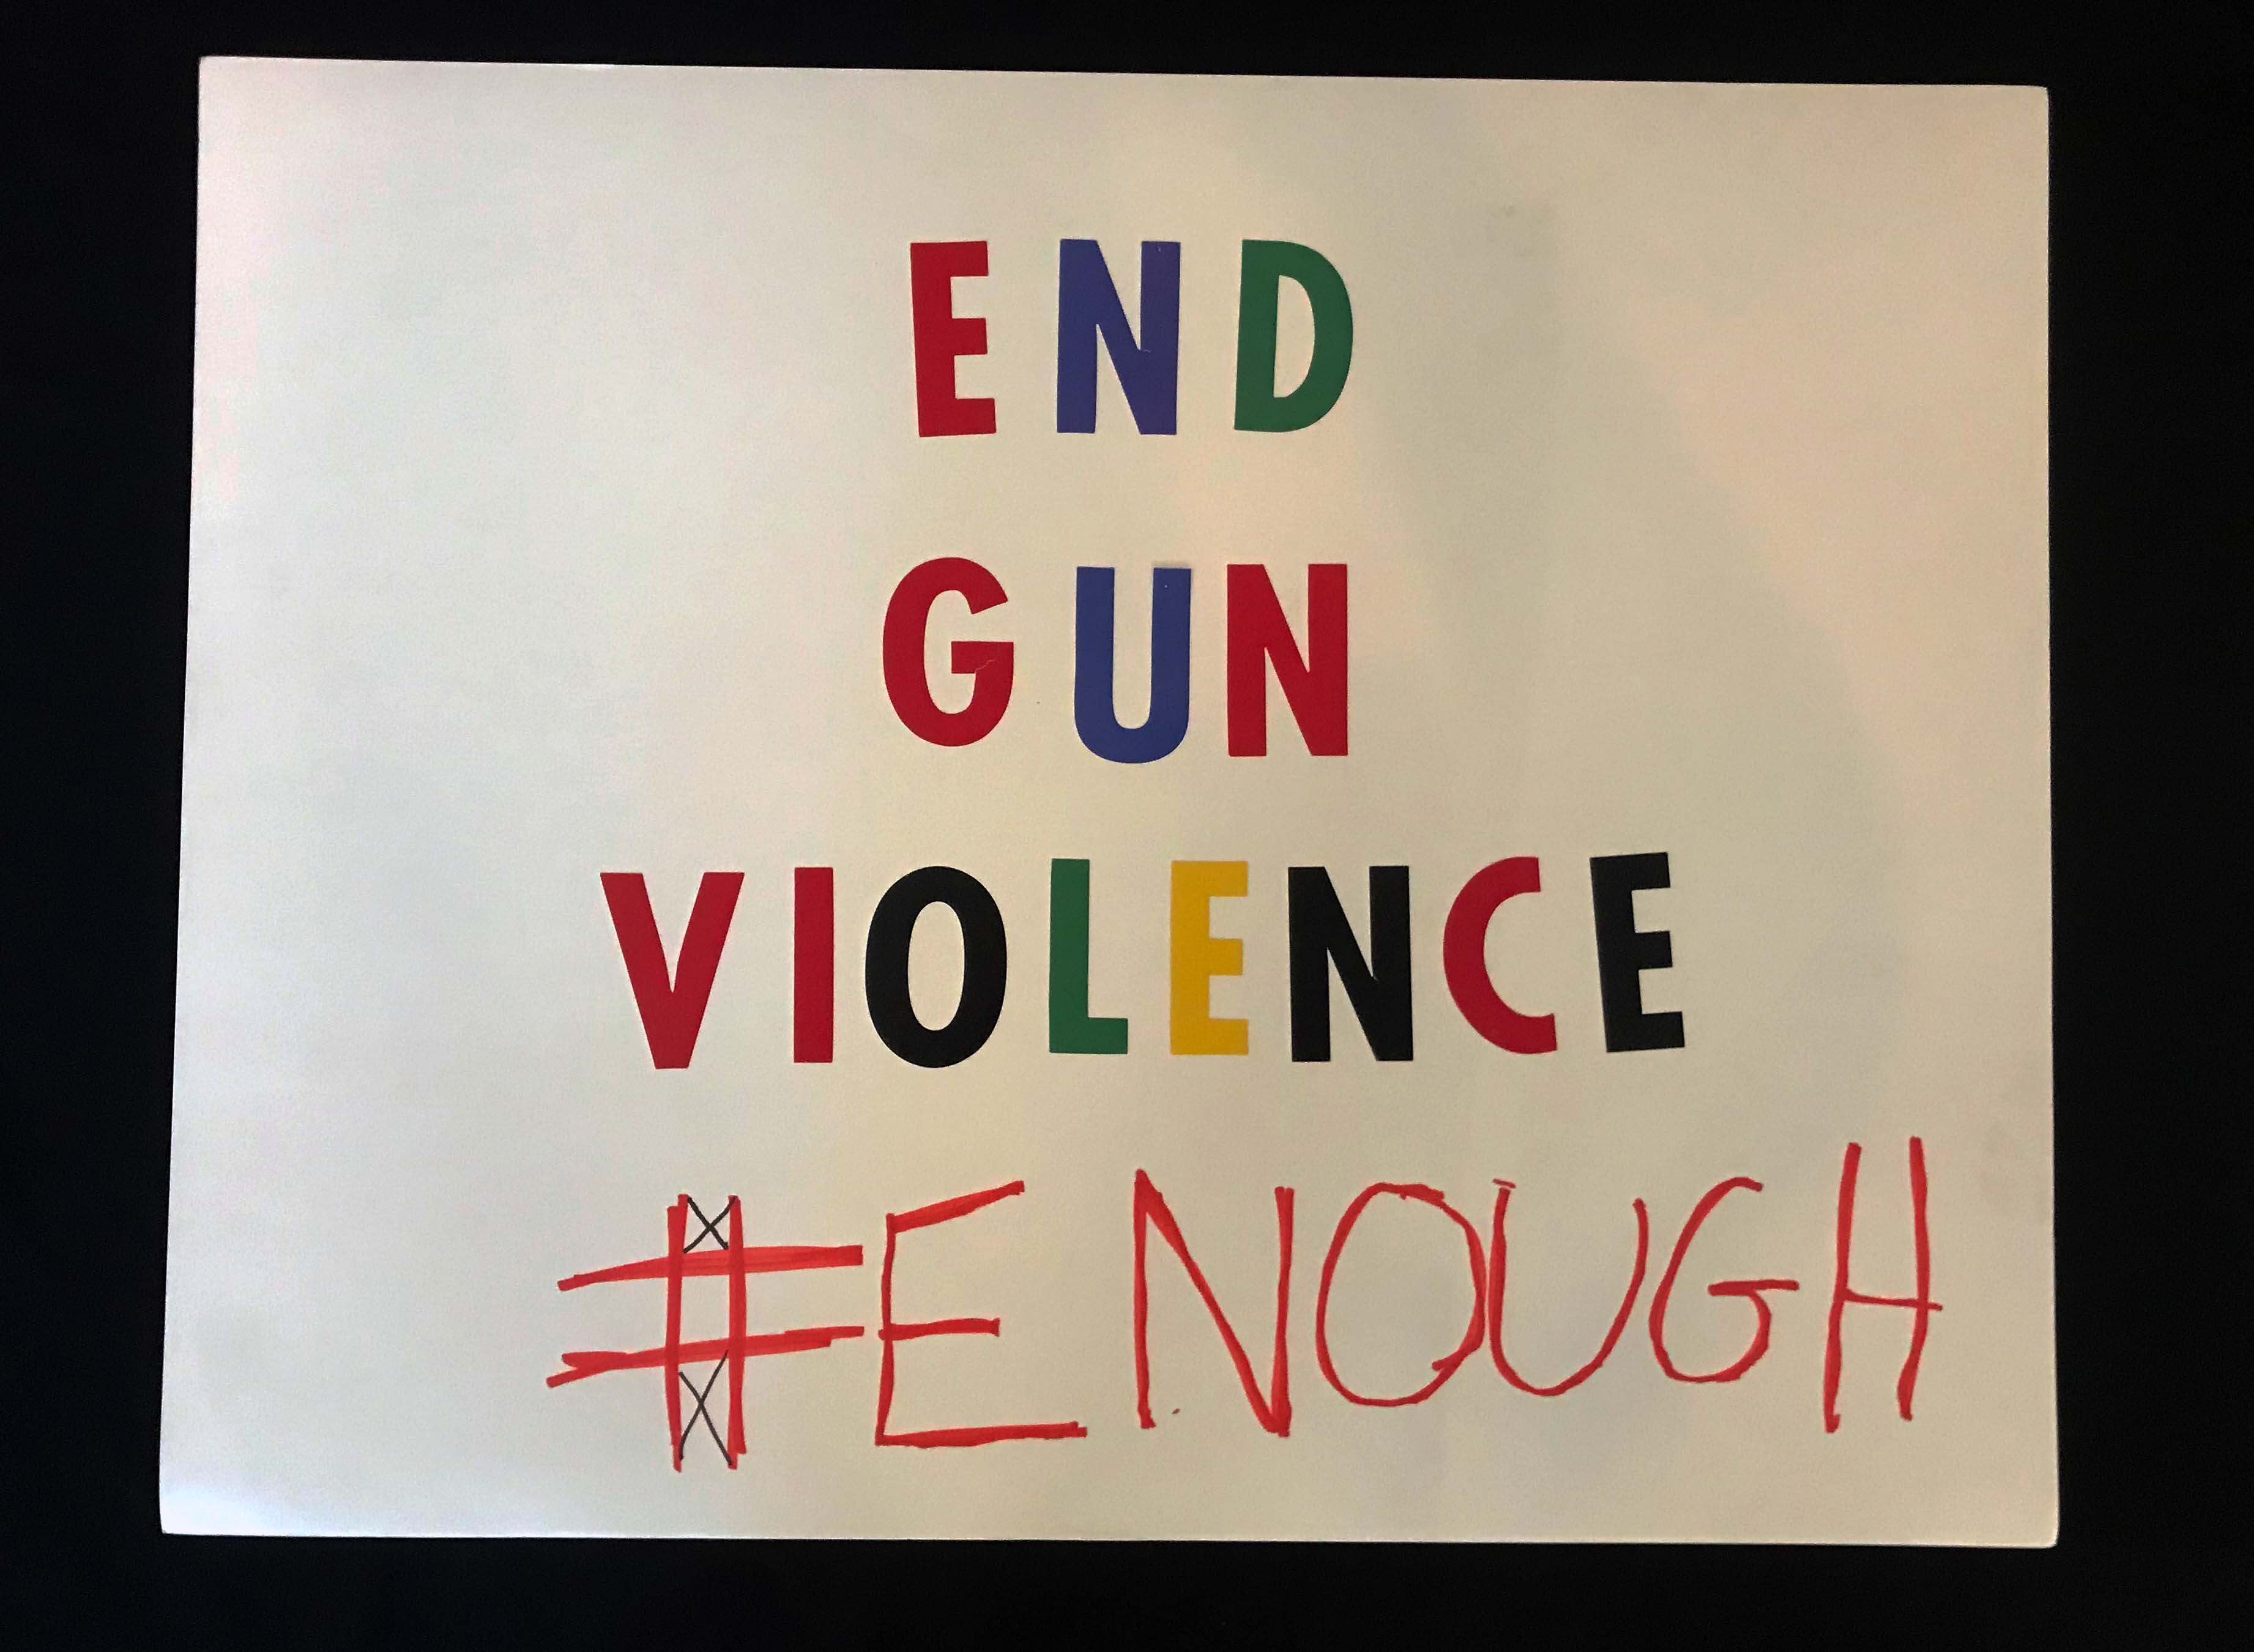 Charlotte March for Our Lives, 2018. Sign reads: "End gun violence. #enough"